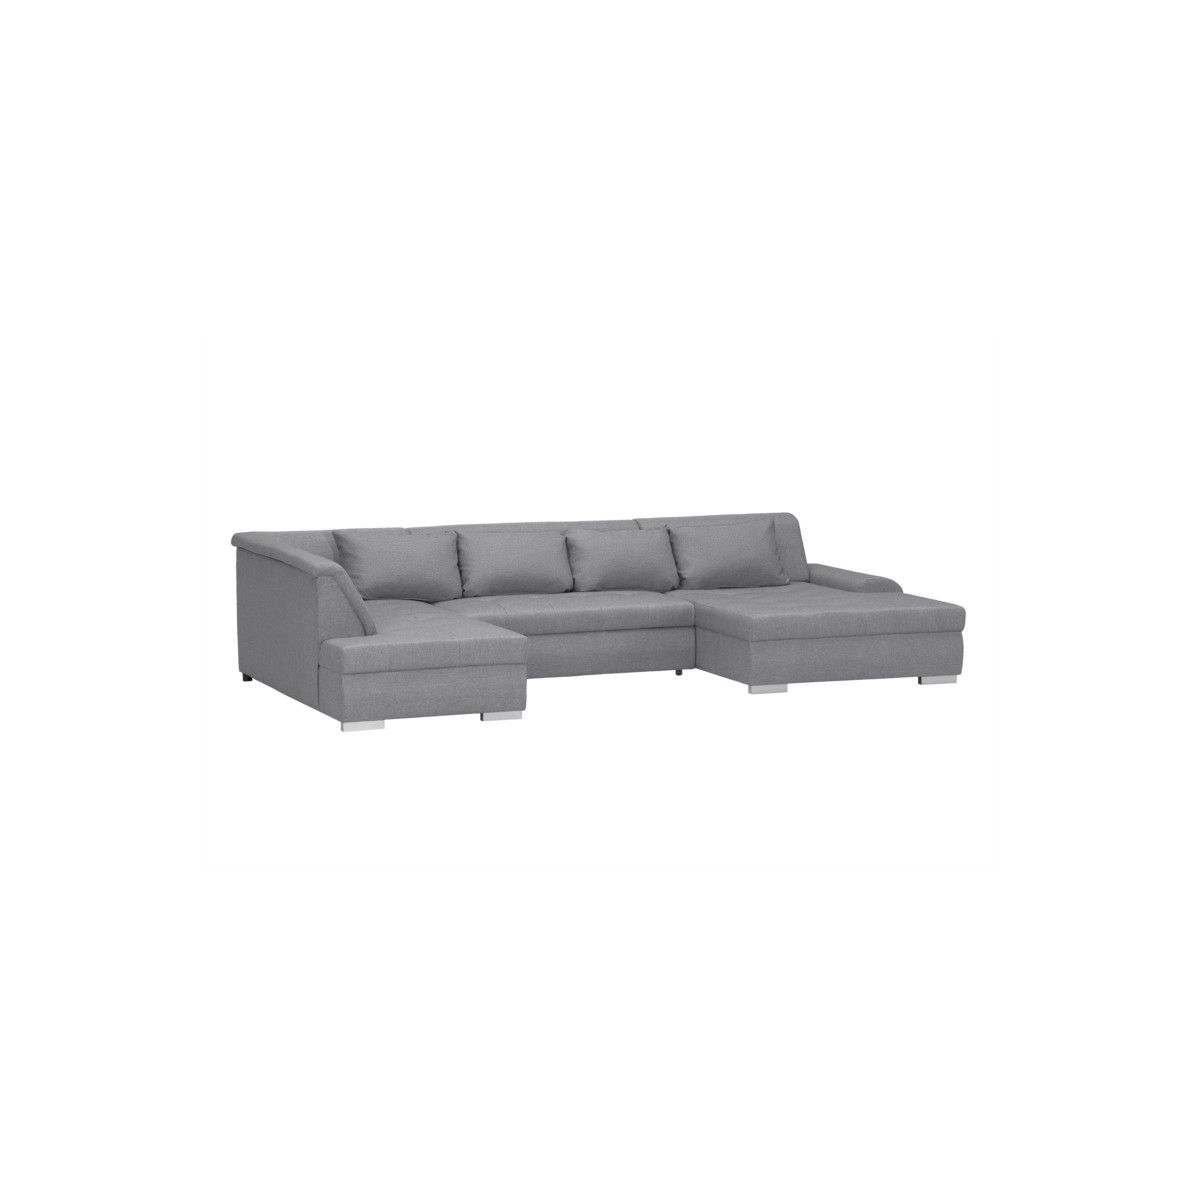 Convertible Corner Sofa 6 Places Fabric Left Angle Wide (light Grey) Pertaining To Convertible Light Gray Chair Beds (View 7 of 15)